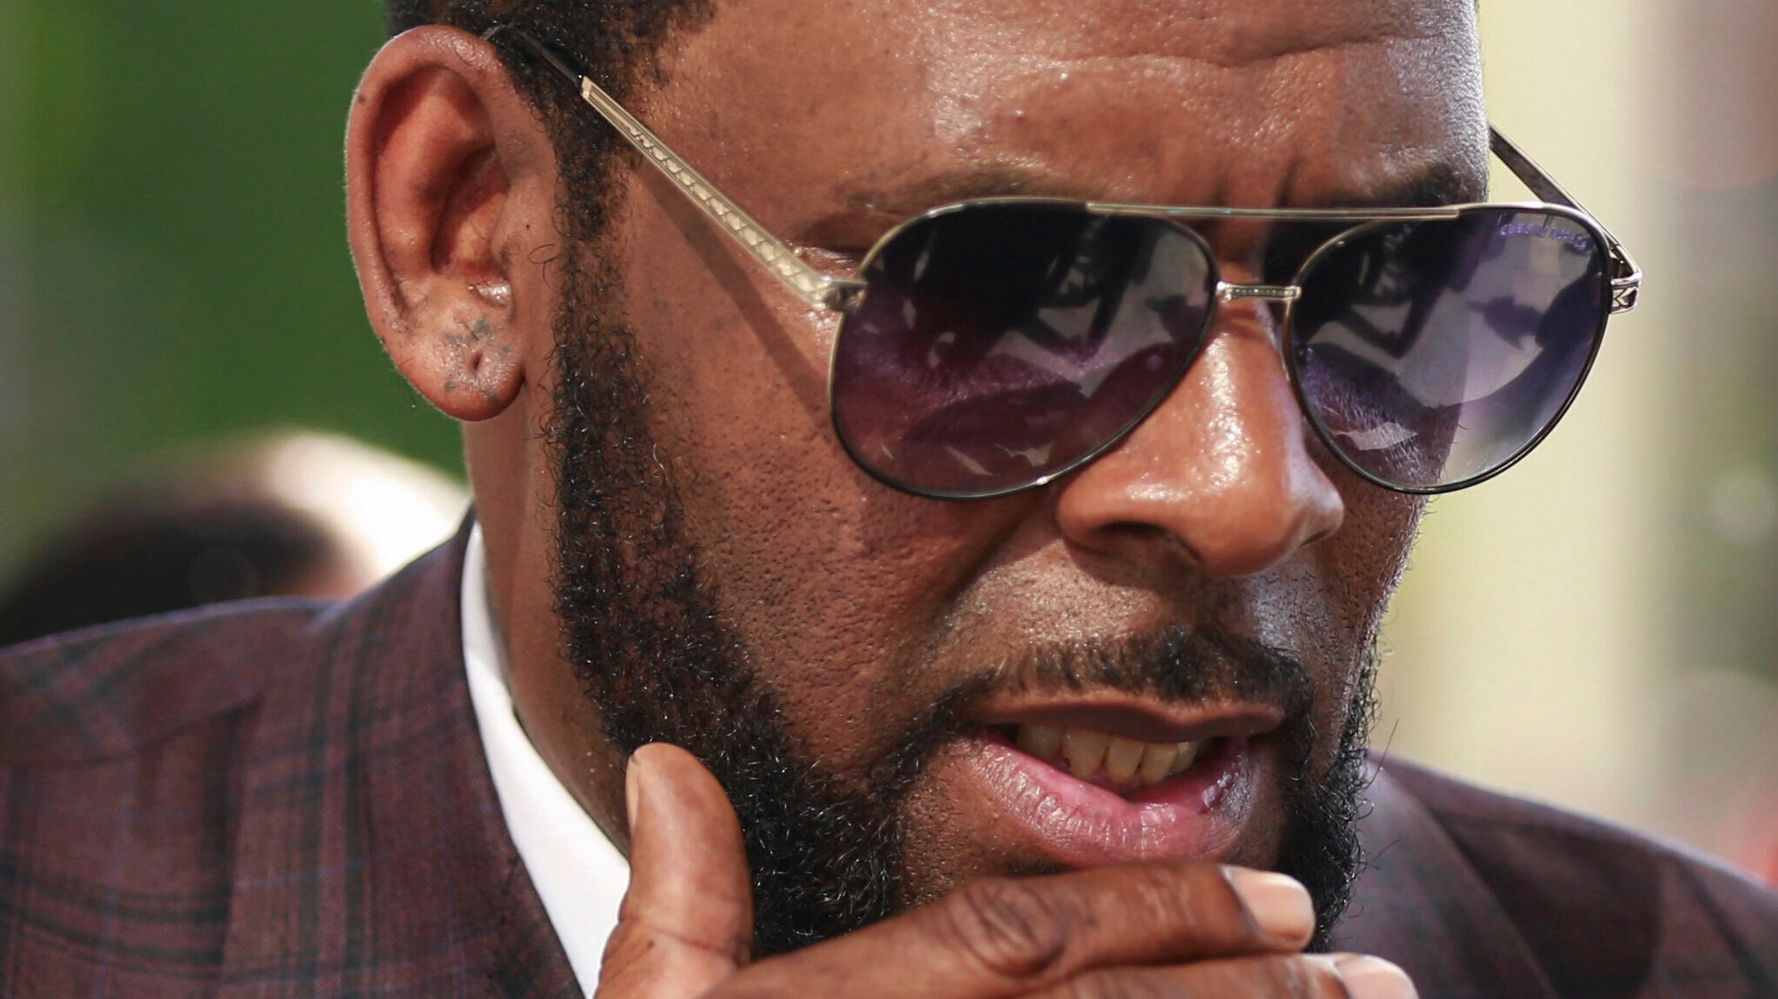 R. Kelly Allegedly Sexually Assaulted Former Radio Intern While She Was Unconscious